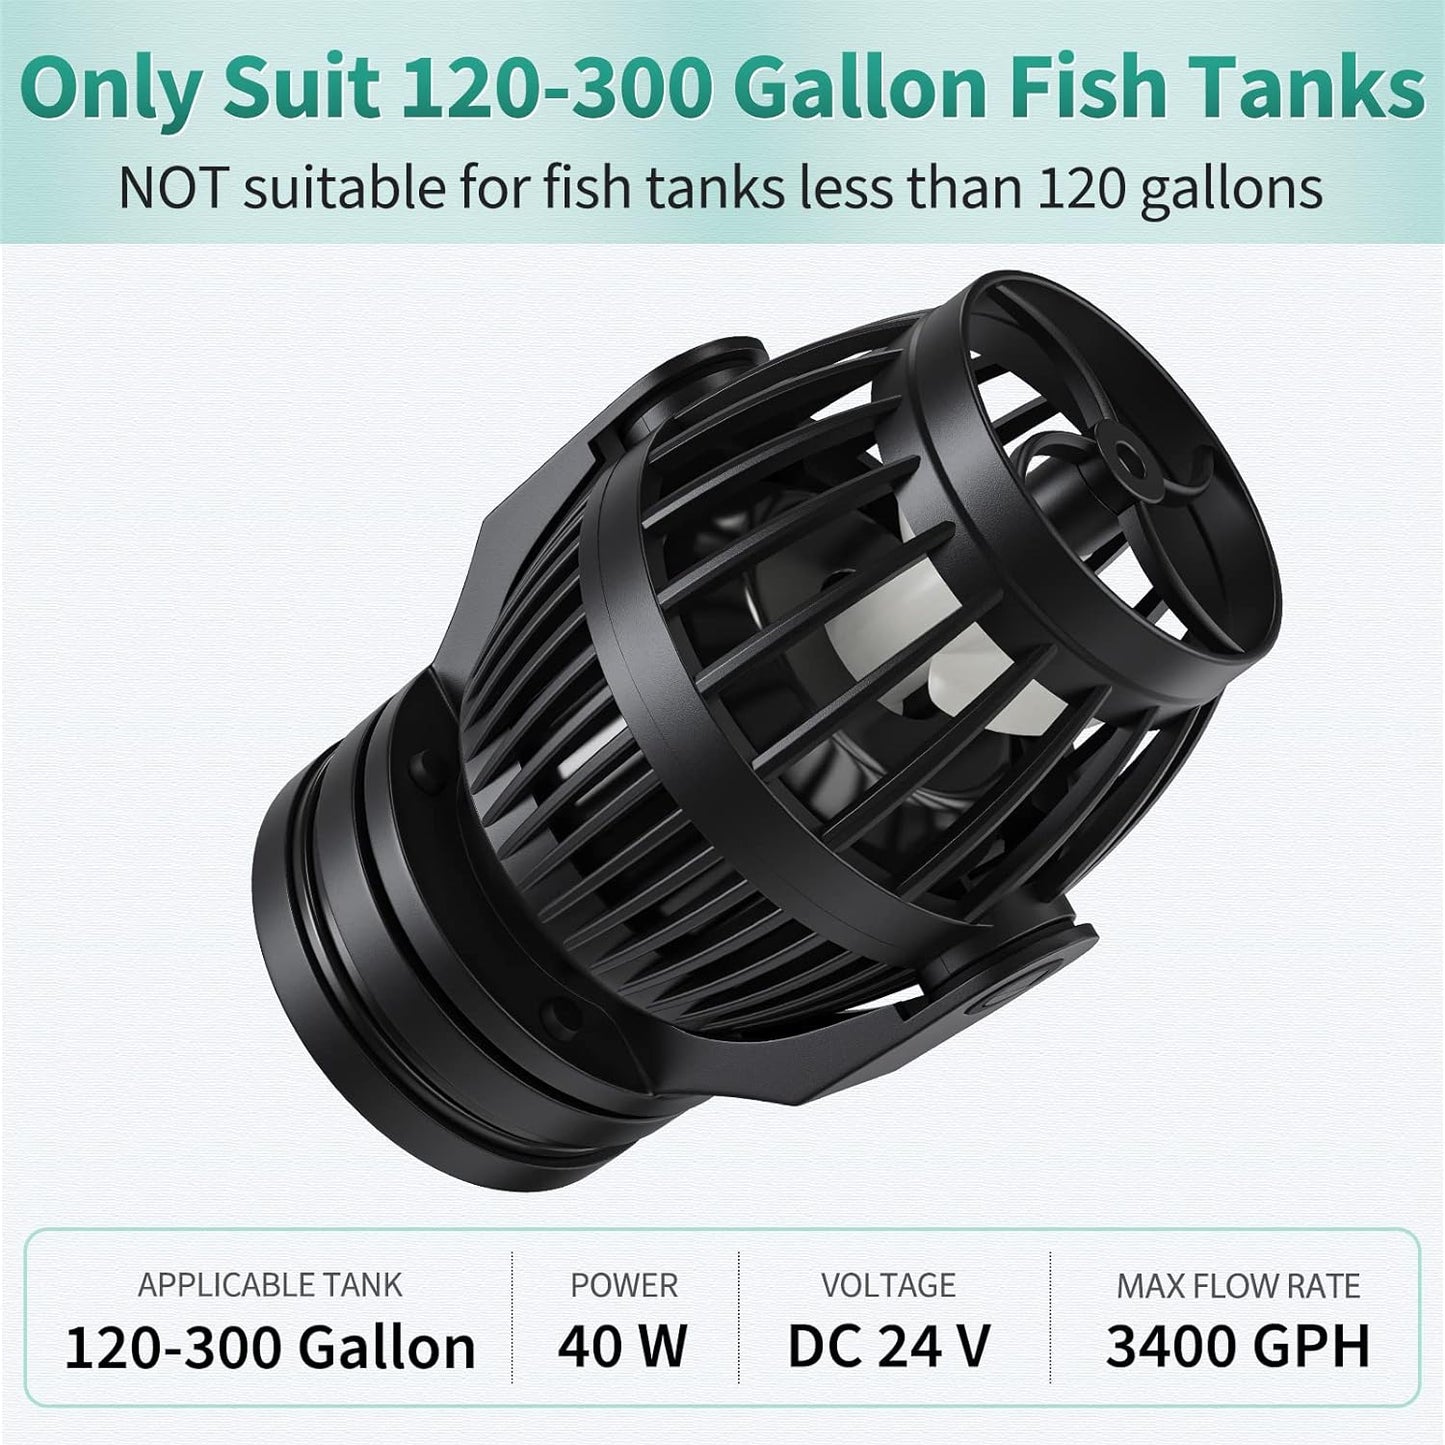 Aquarium Wave Maker for 120-300 Gallon Fish Tanks 3400 GPH Adjustable Circulation Pump with Controller and Strong Magnetic Suction Base Submersible Power Head for Fresh and Salty Water